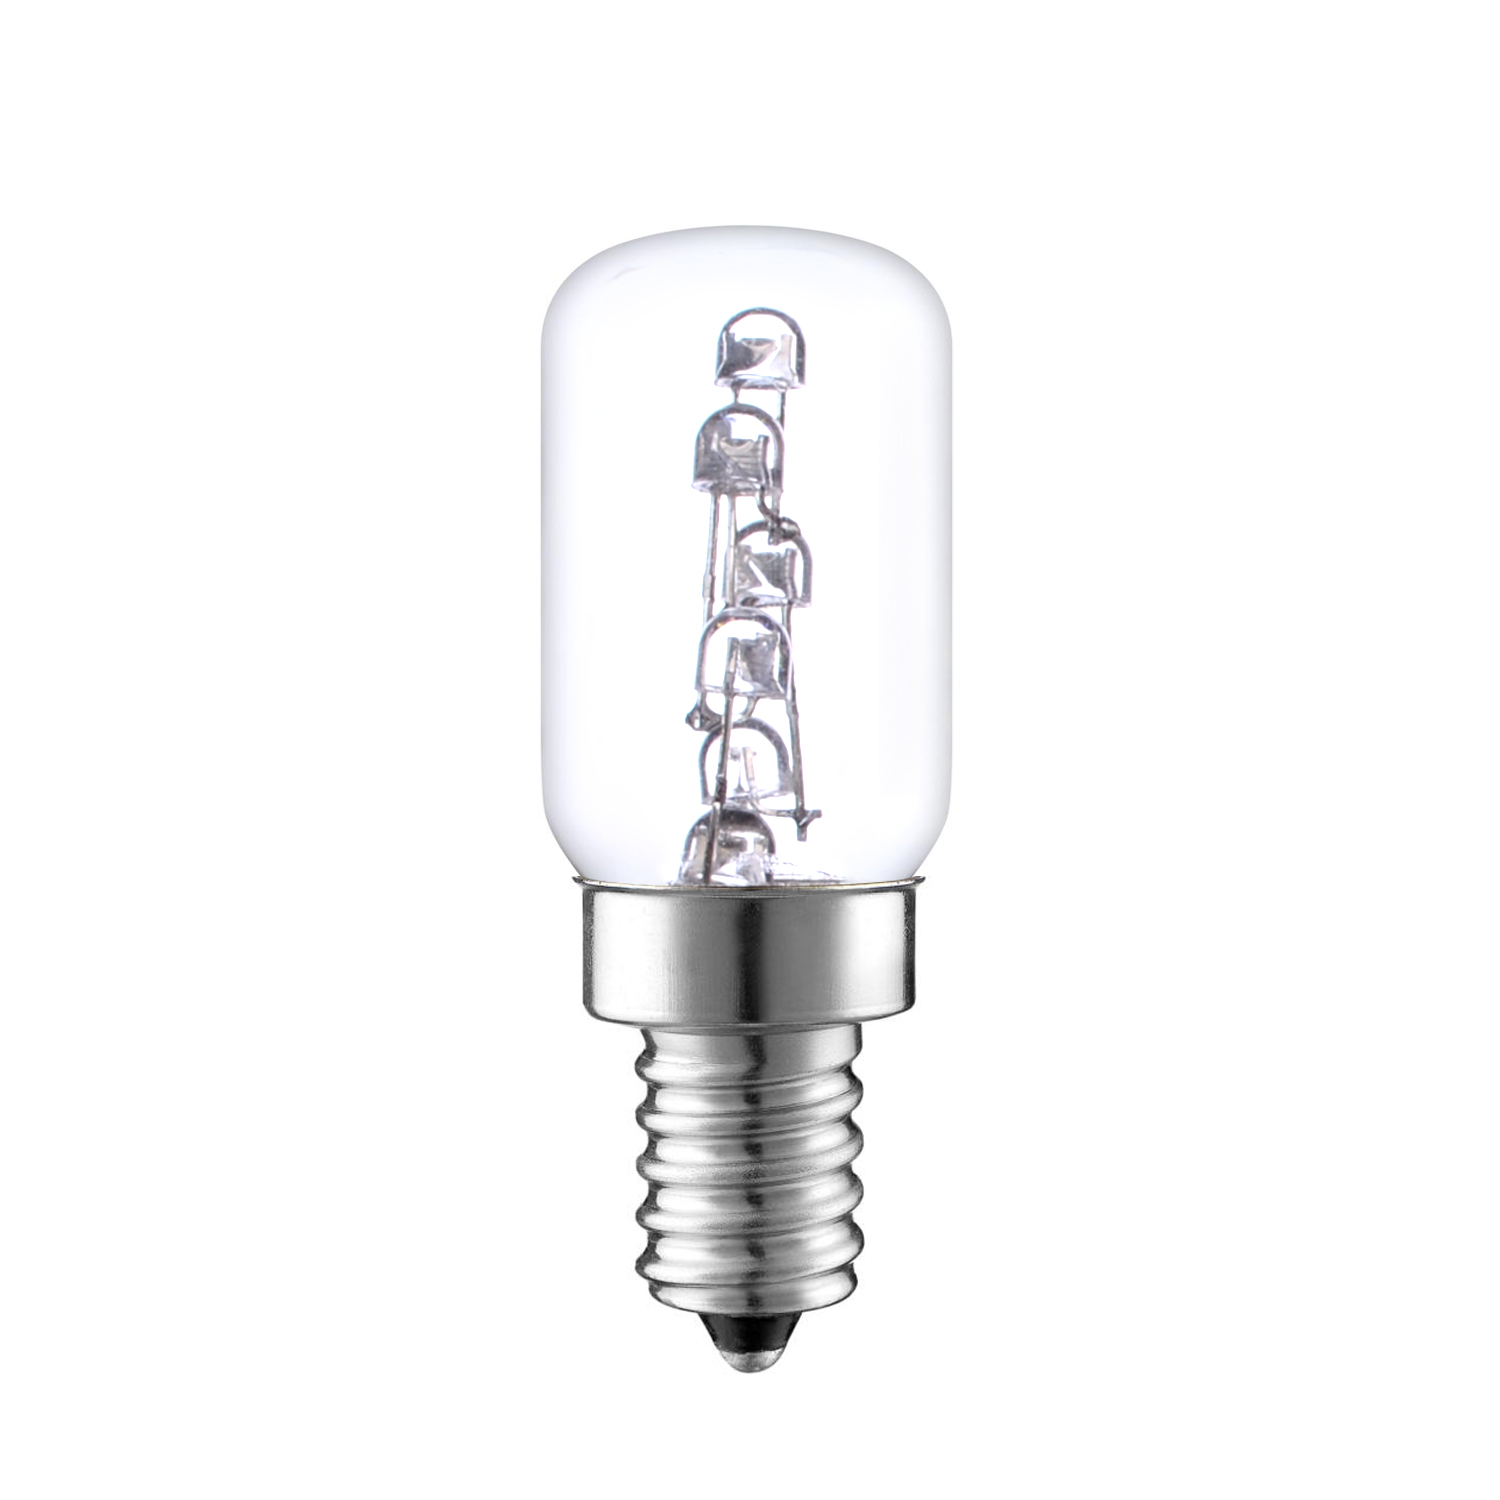 S6 LED bulb for sign indicator and night light bulb